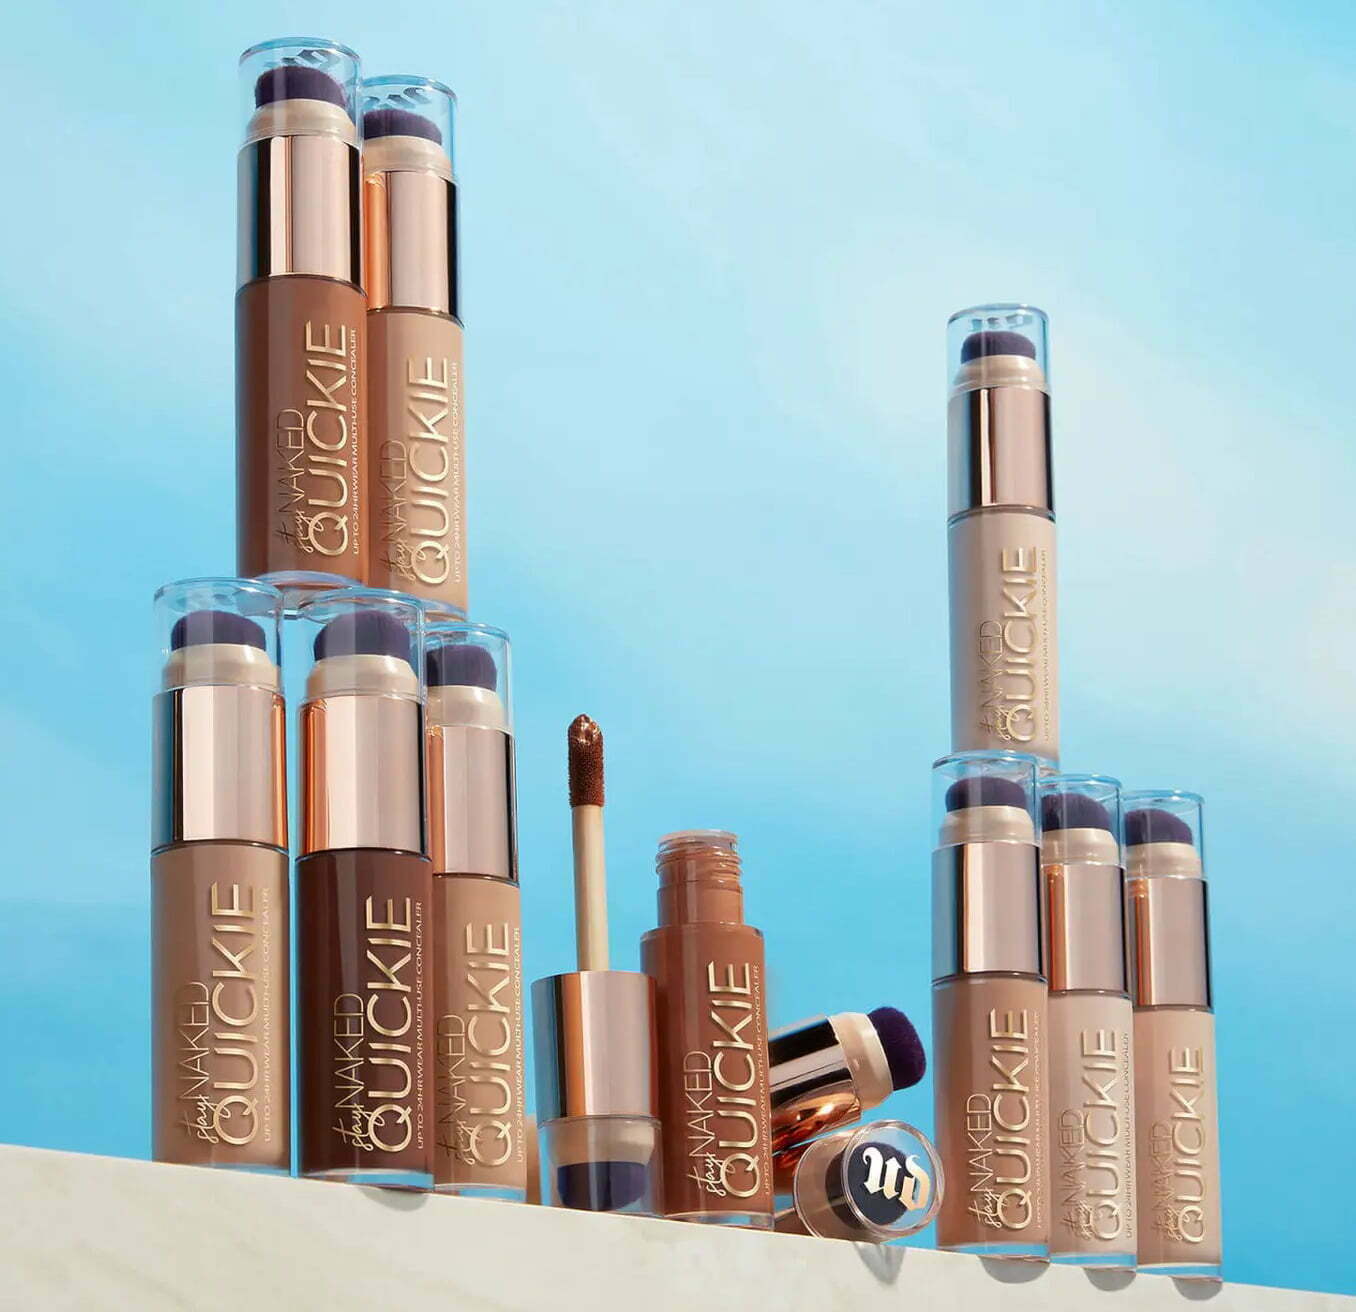 Urban Decay Stay Naked Quickie Concealer